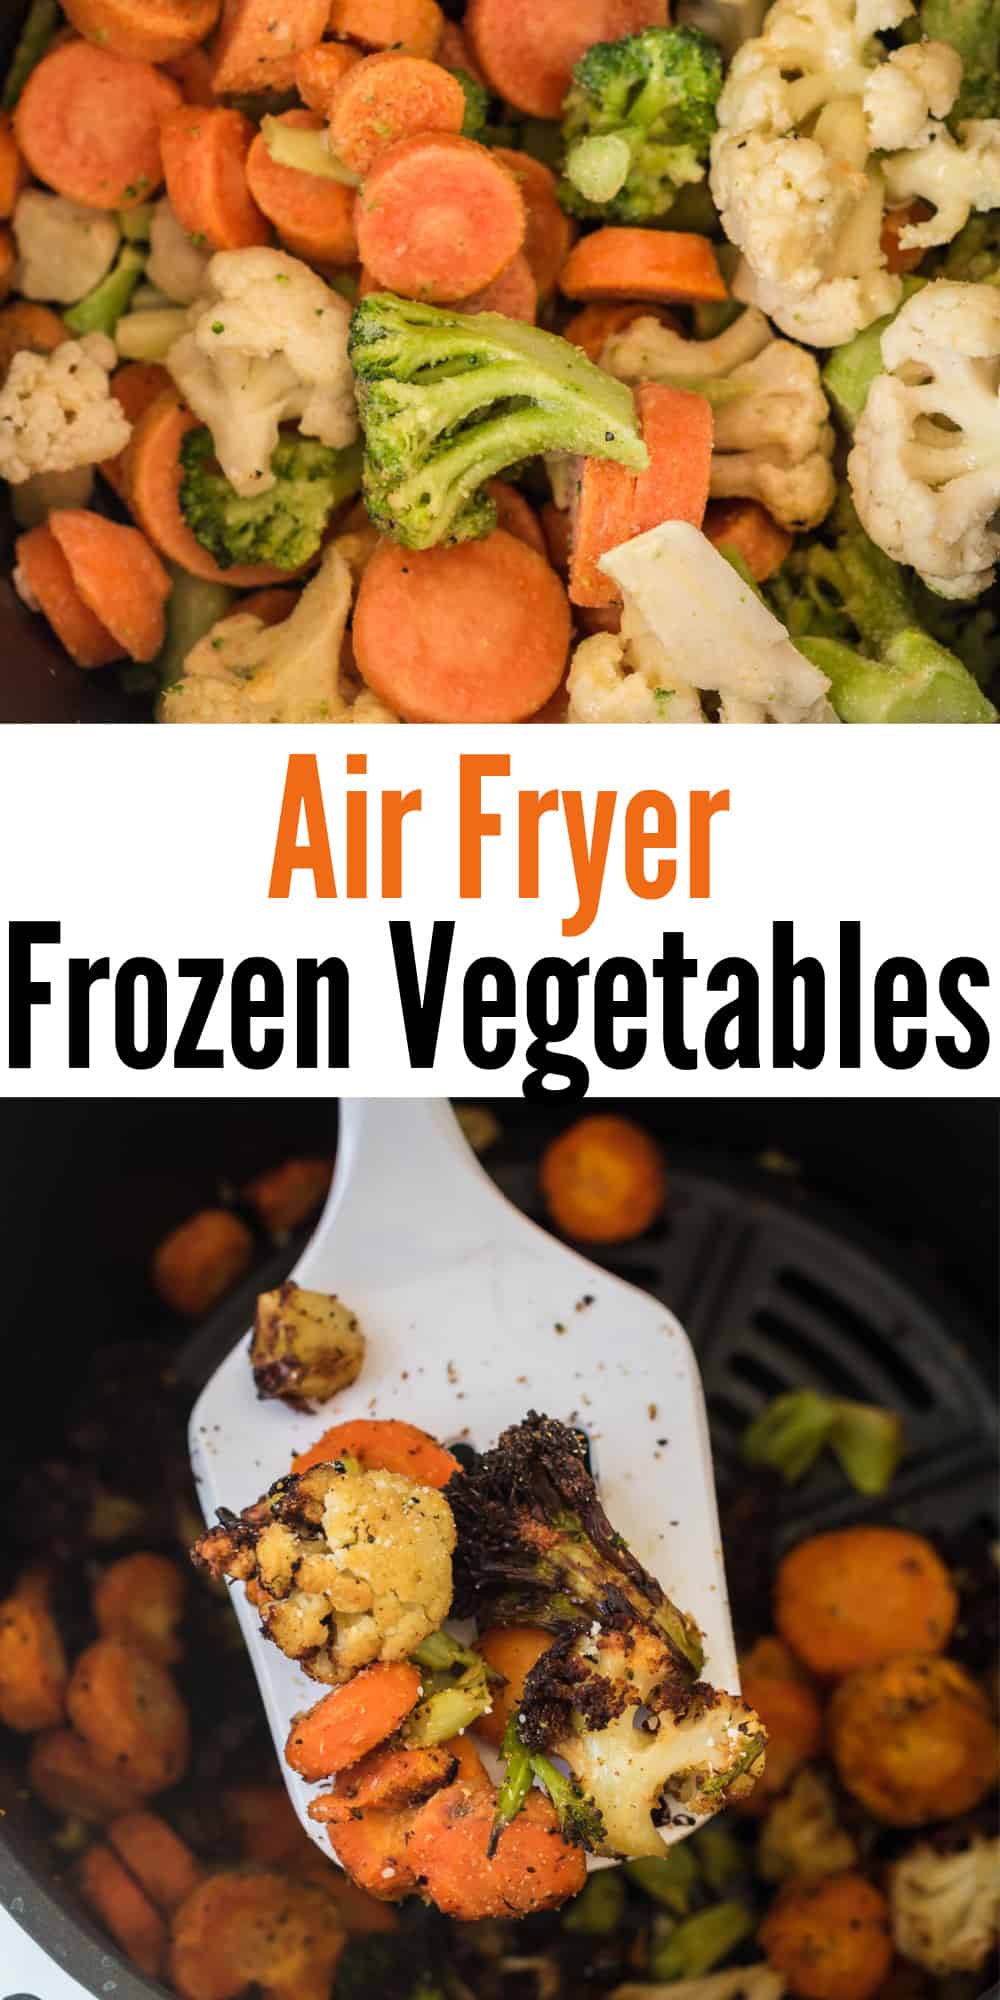 image with text "air fryer frozen vegetables"